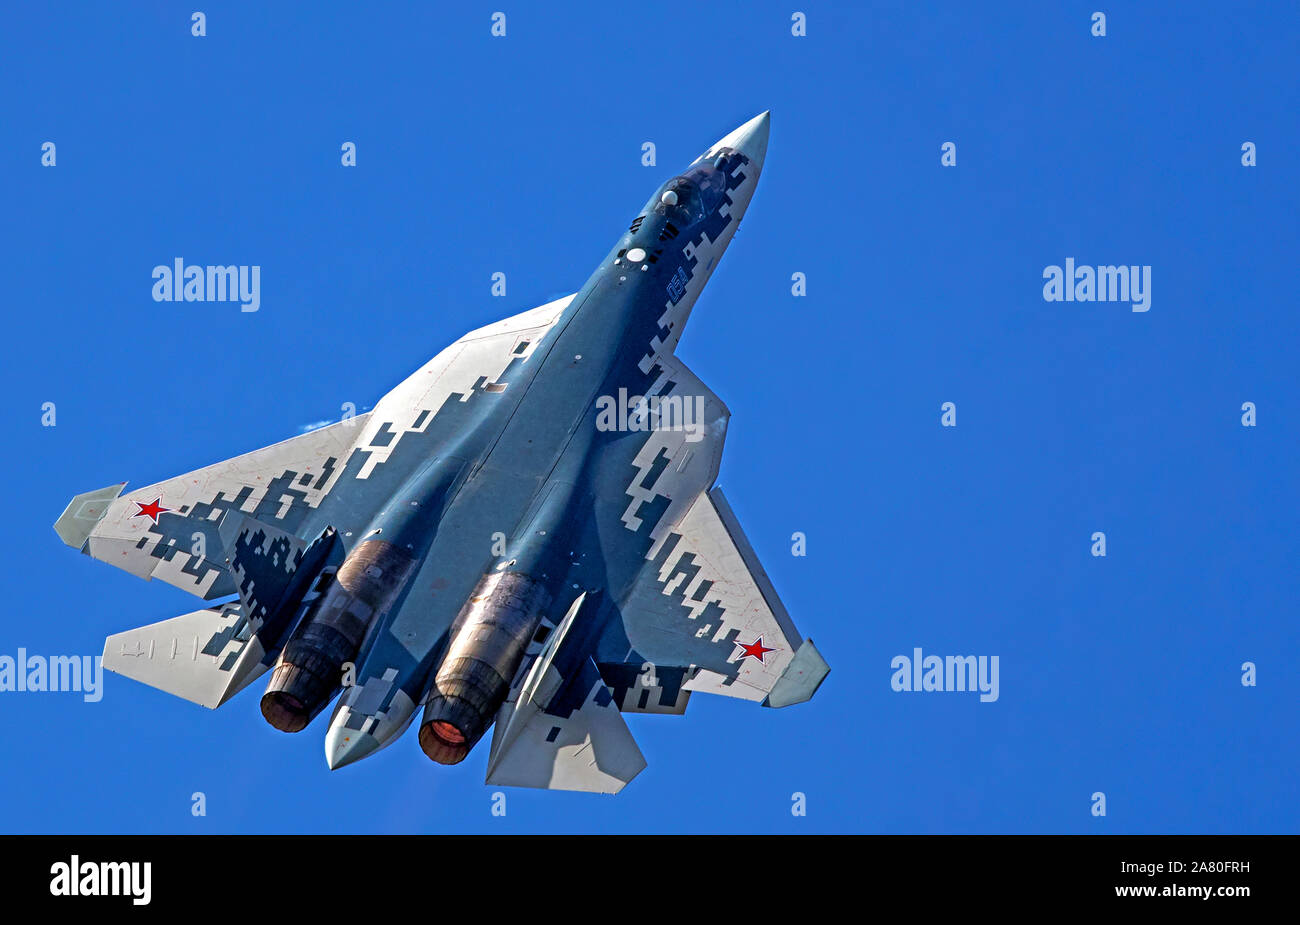 Sukhoi Su-57 (Felon) is a stealth, single-seat, twin-engine multirole fifth-generation jet fighter being developed since 2002 for air superiority and Stock Photo